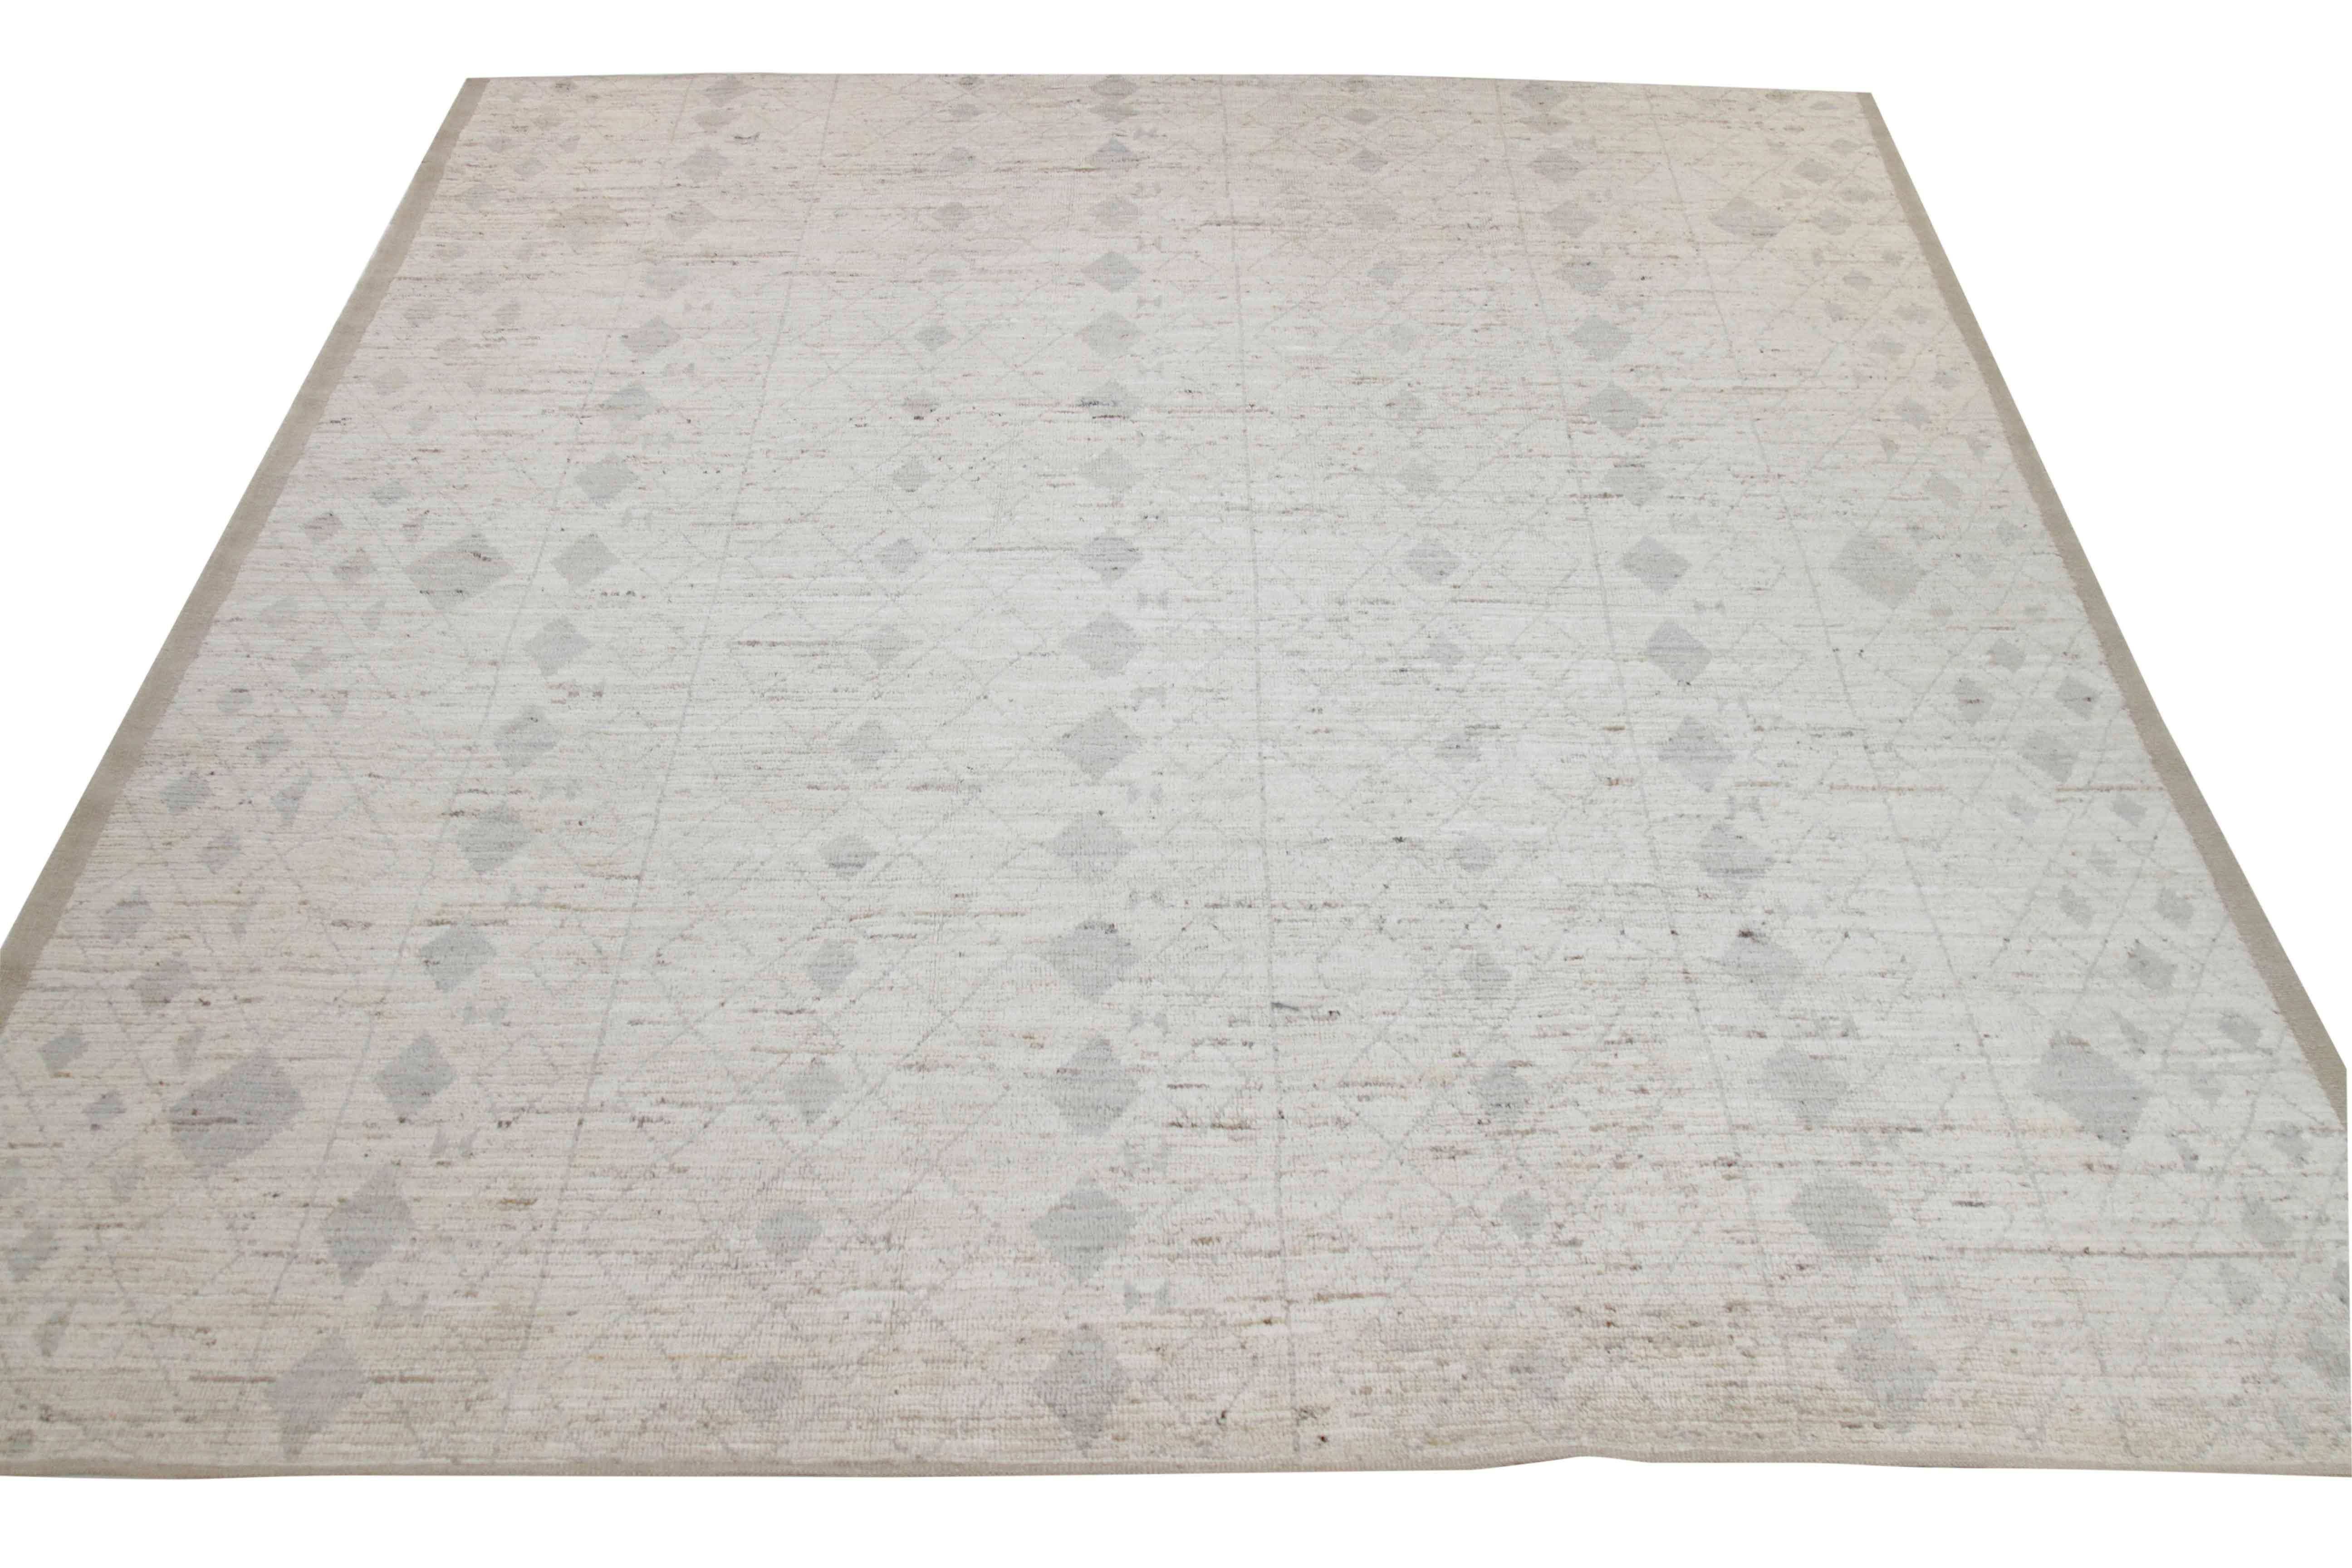 Modern Afghan rug handwoven from the finest sheep’s wool. It’s colored with all-natural vegetable dyes that are safe for humans and pets. This piece is a traditional Afghan weaving featuring a Moroccan inspired design. It’s highlighted by gray